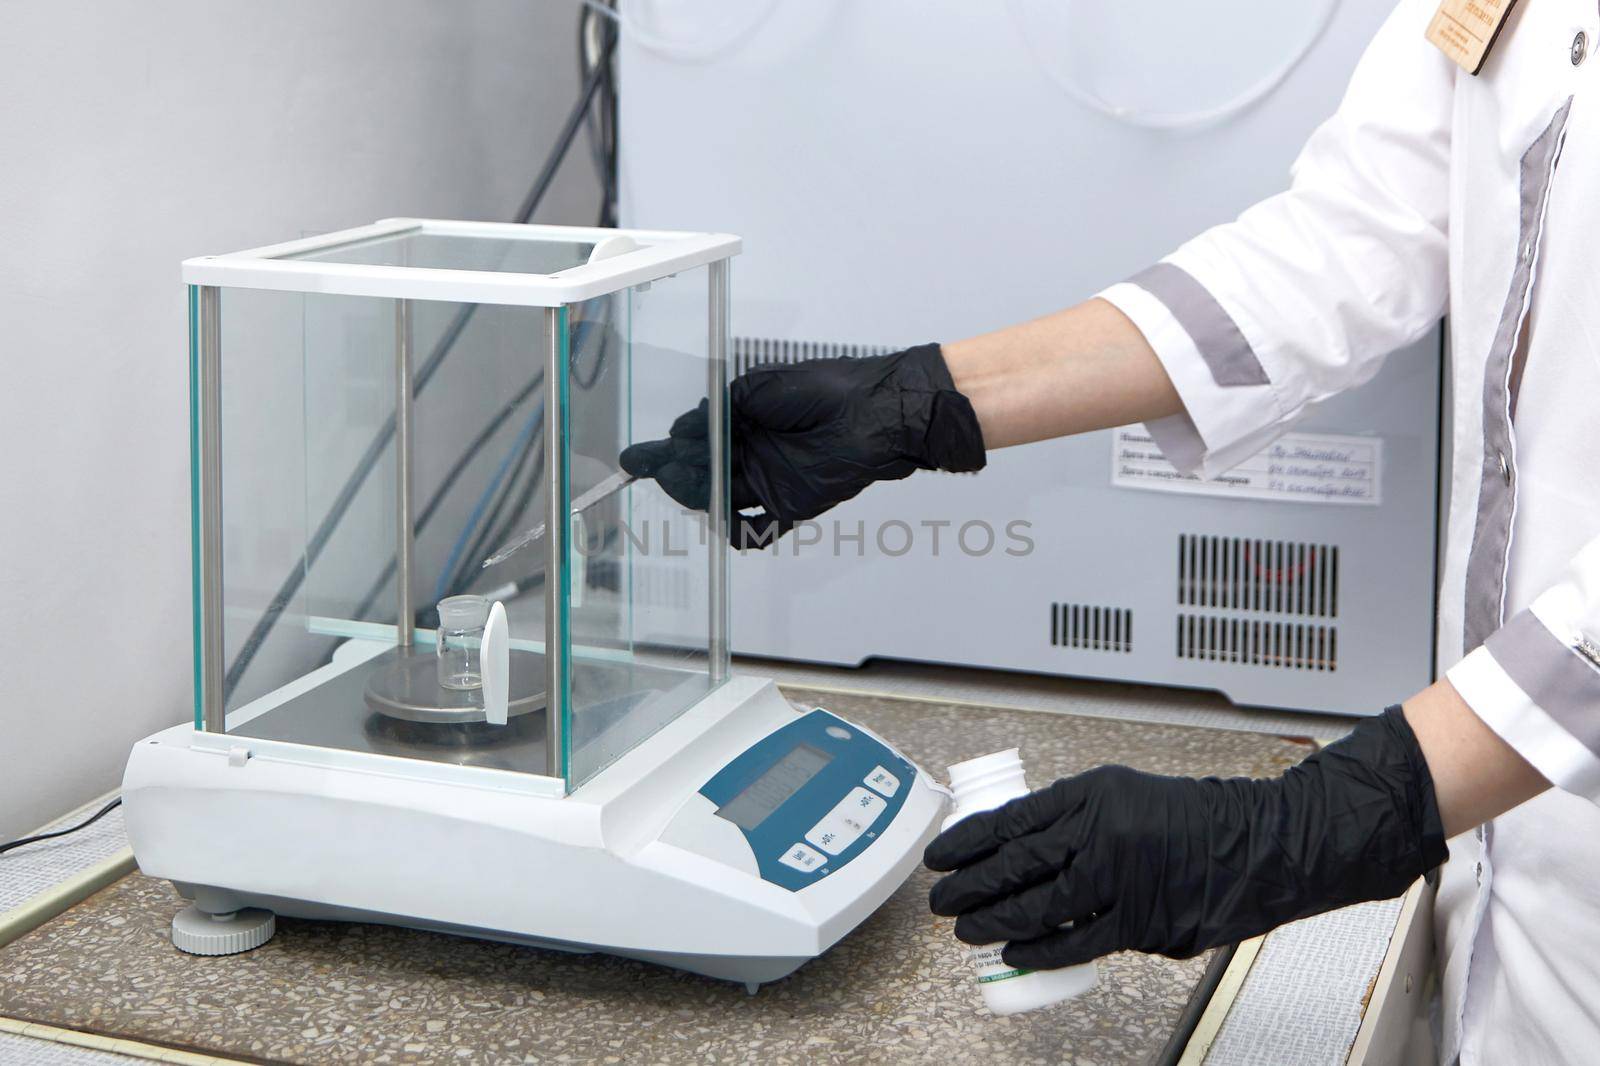 Scientist weighing chemicals by digital scales in grams in chemical laboratory by Mariakray